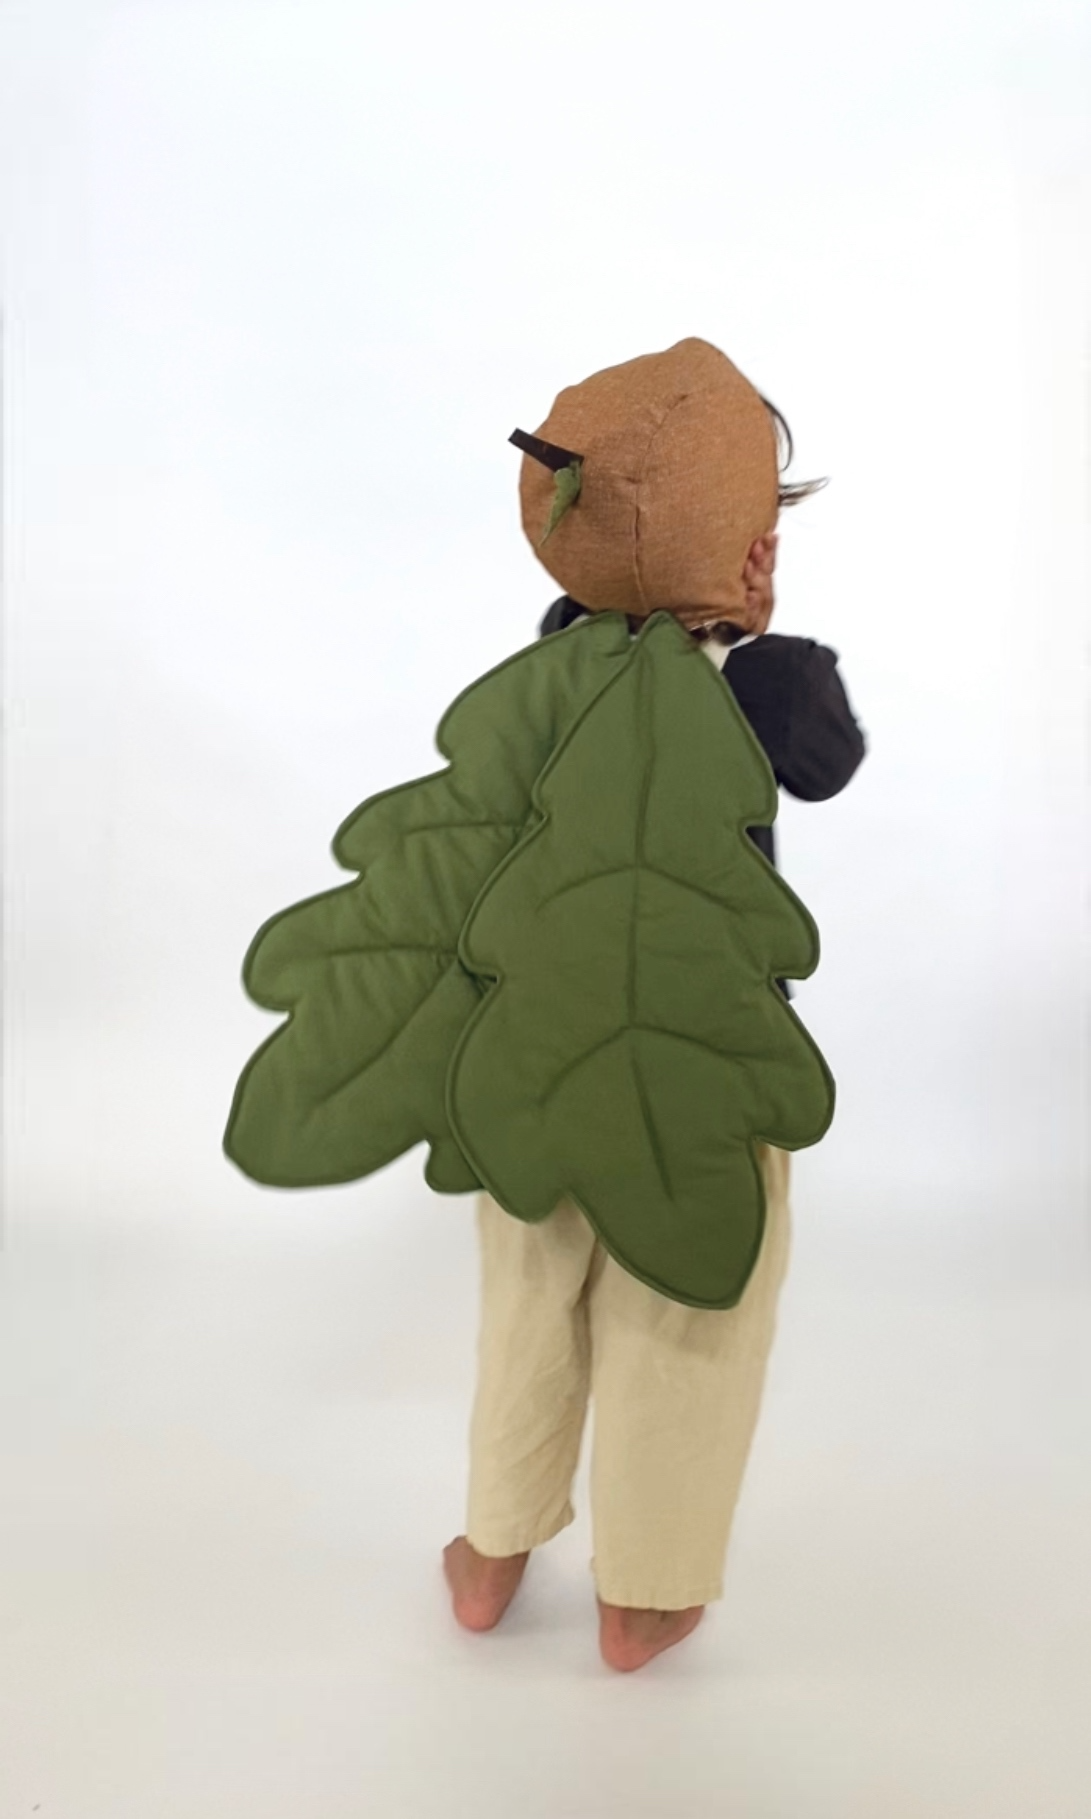 Forest fairy costume with acorn hat.